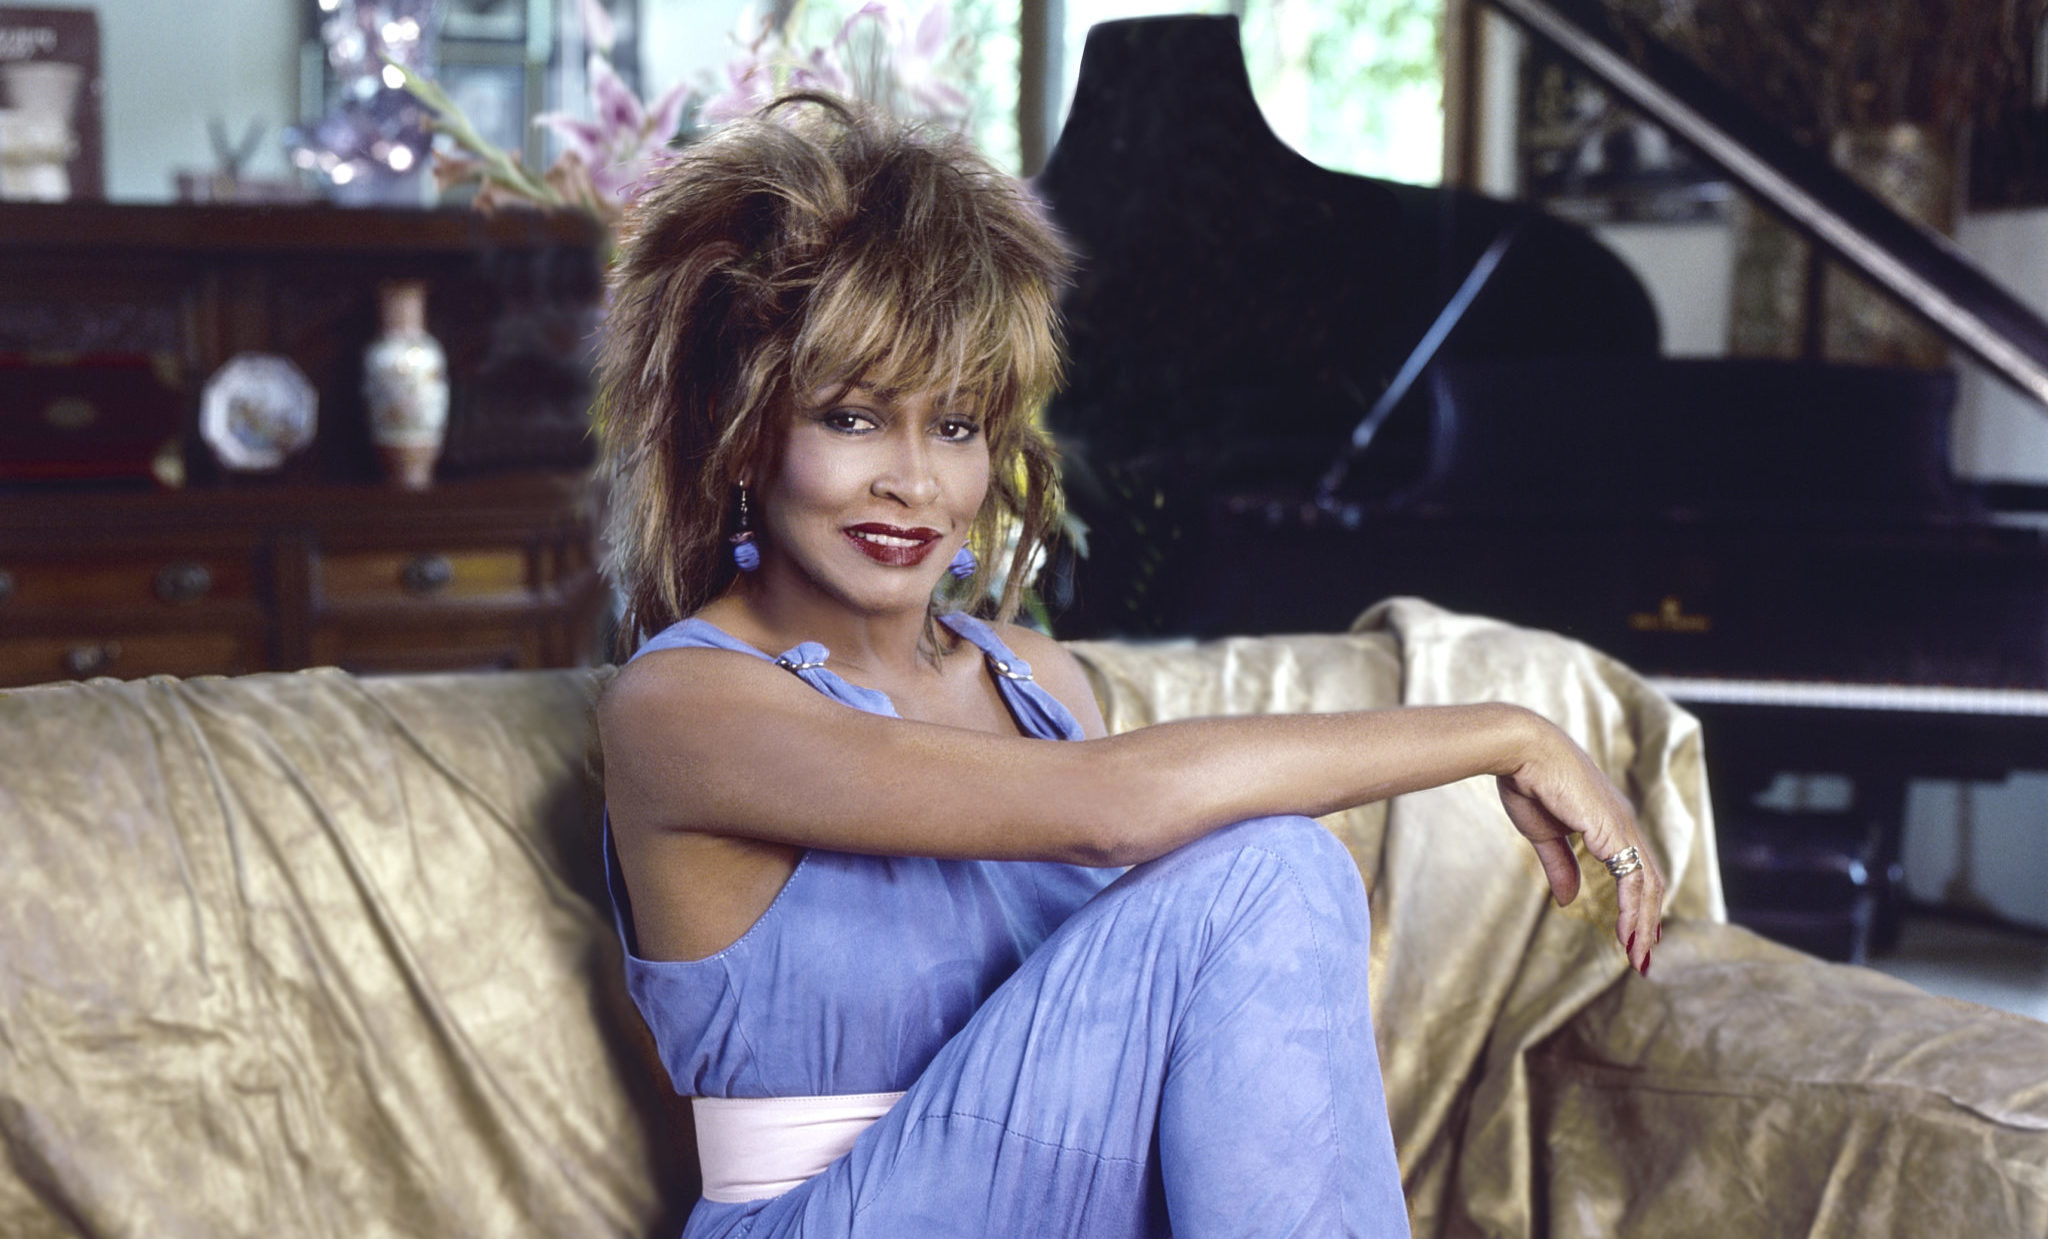 <p>When she was just 11, <strong>Tina Turner was scarred for life by a horrific incident.</strong> It was that year that her mother abandoned the family and left with no warning. Apparently escaping an abusive relationship with Tina’s father, her mother fled to St Louis and left her children behind with no goodbyes. The incident left her feeling unwanted and unloved, and it would have a jarring effect on Tina as she grew up.</p>